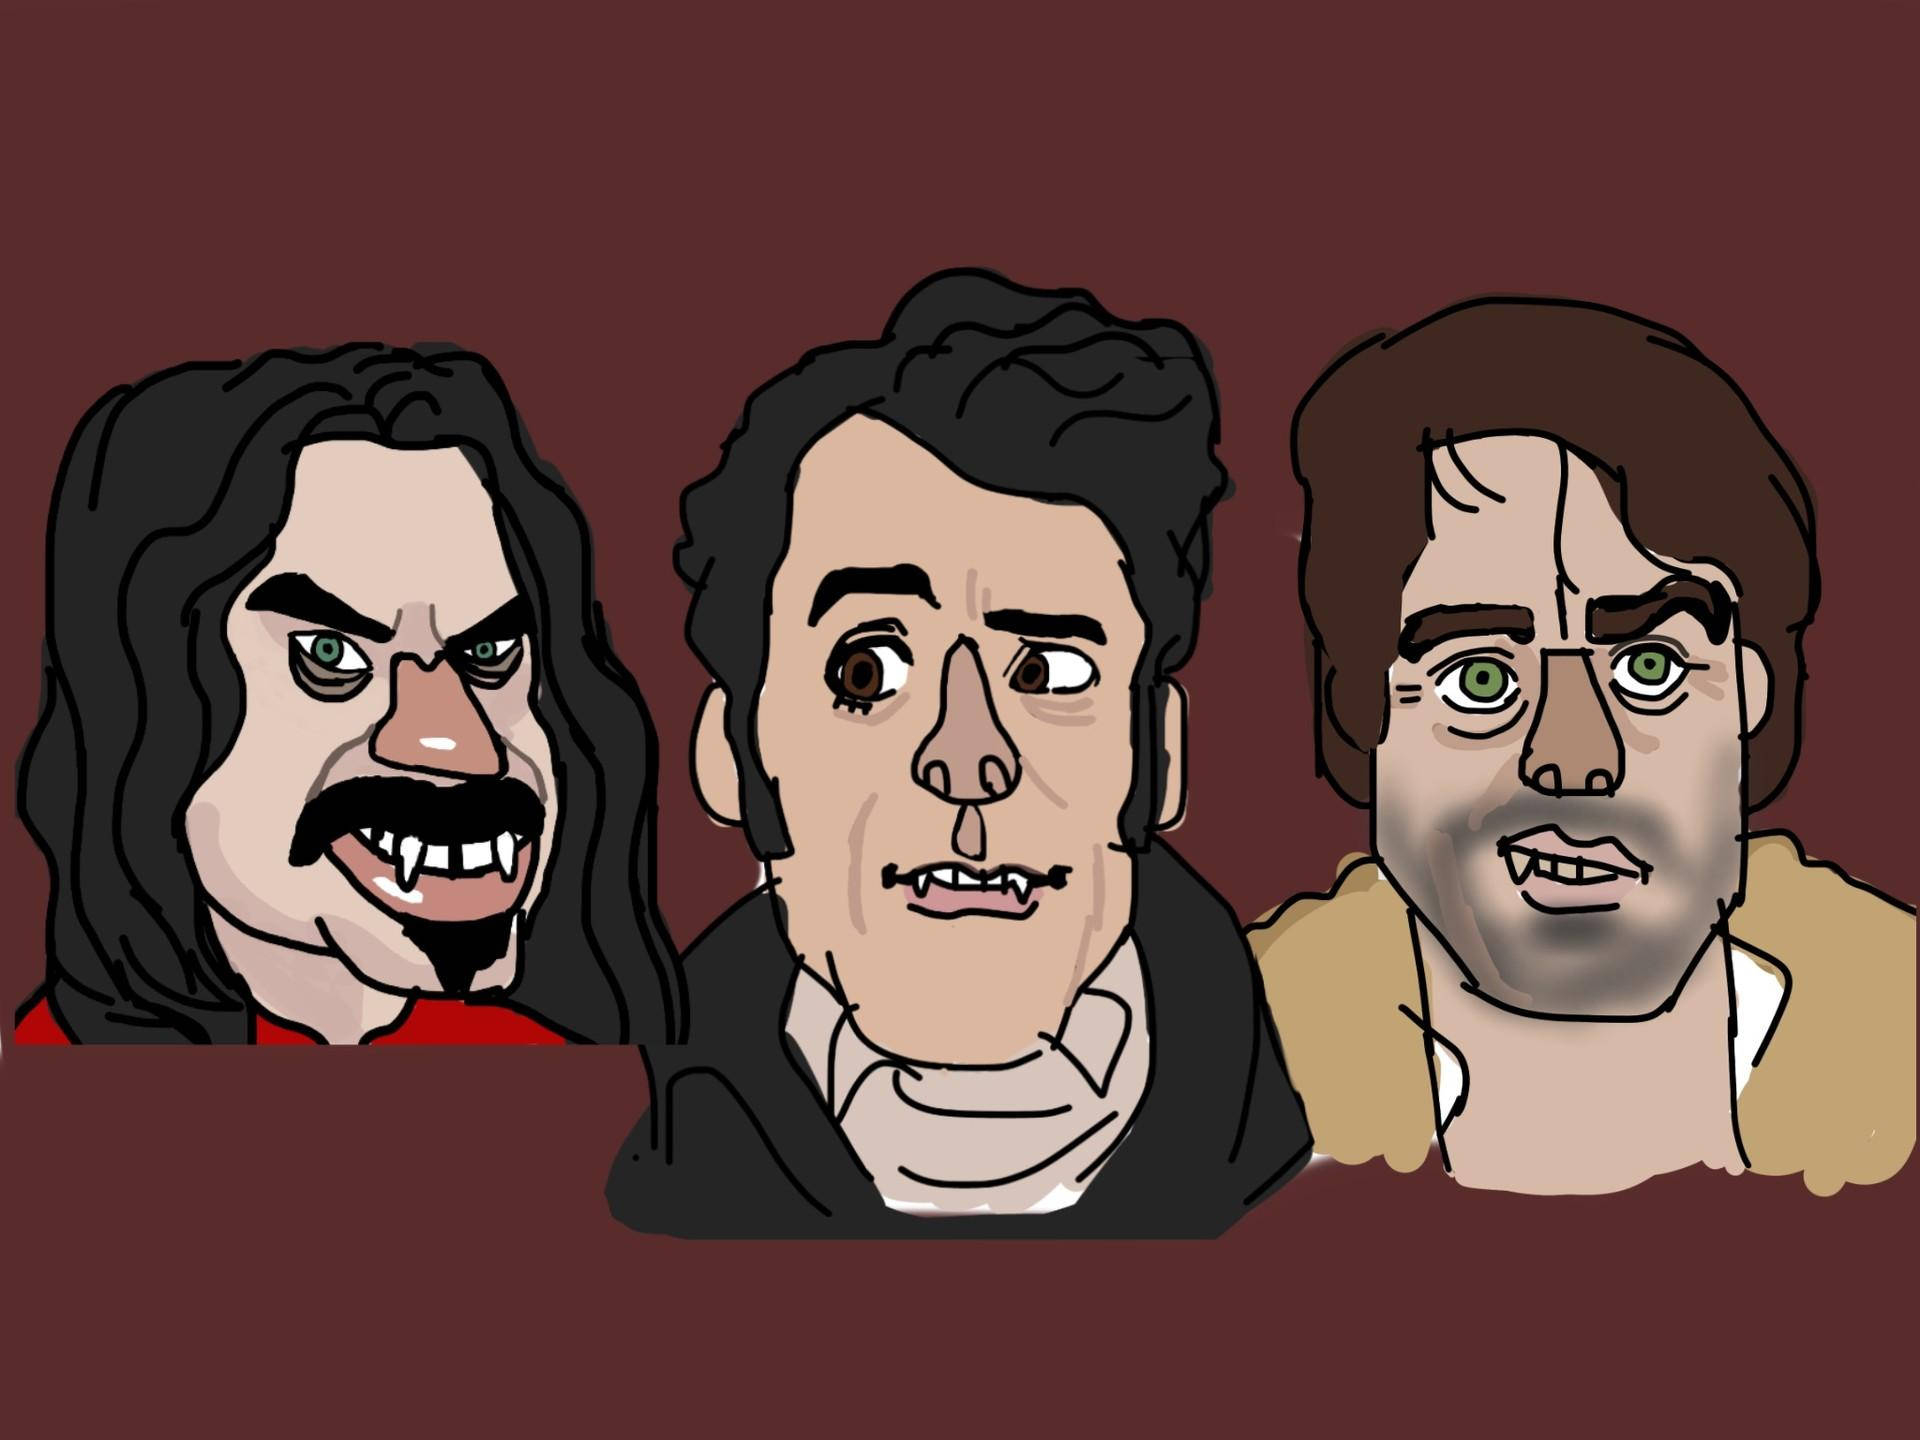 What We Do In The Shadows Digital Art Background